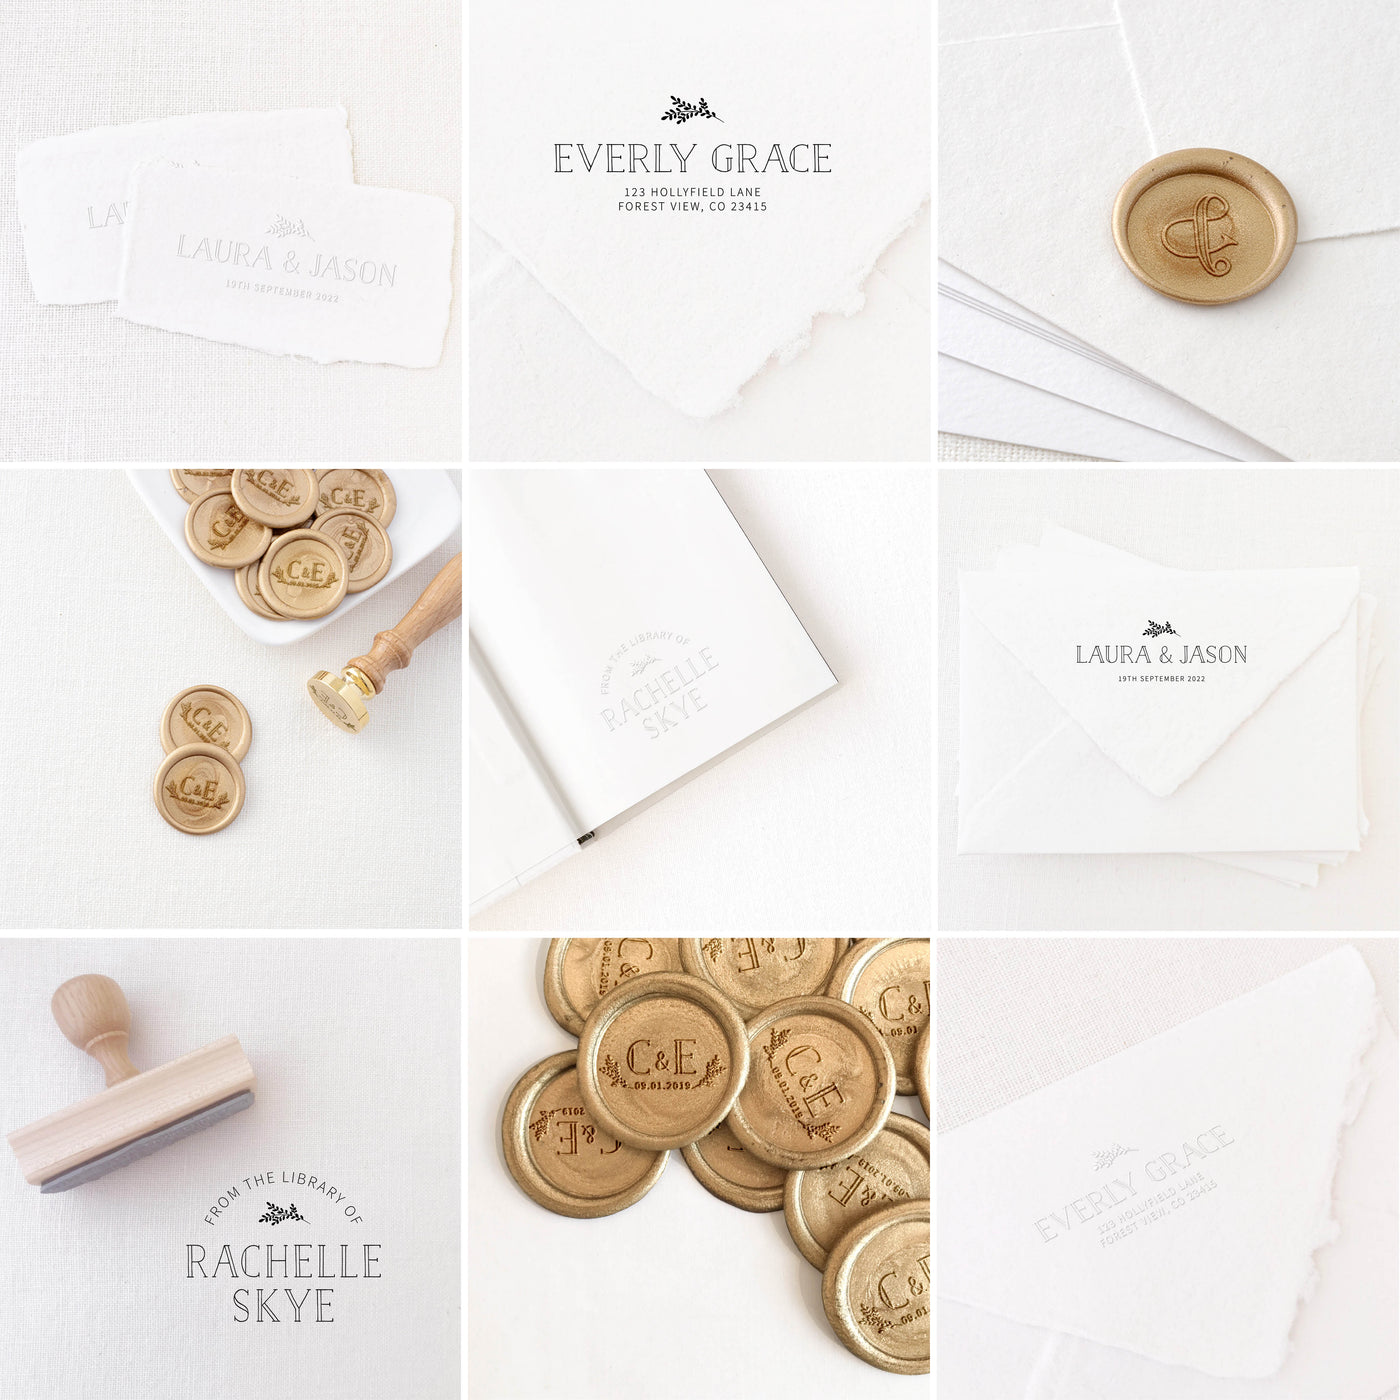 Everly Classic Botanical Collection | Custom Rubber Stamp, Wax Seal Stickers & Embosser for Custom Luxe Embellishment Packaging & Fine Art Wedding Stationery Invitations | Heirloom Seals